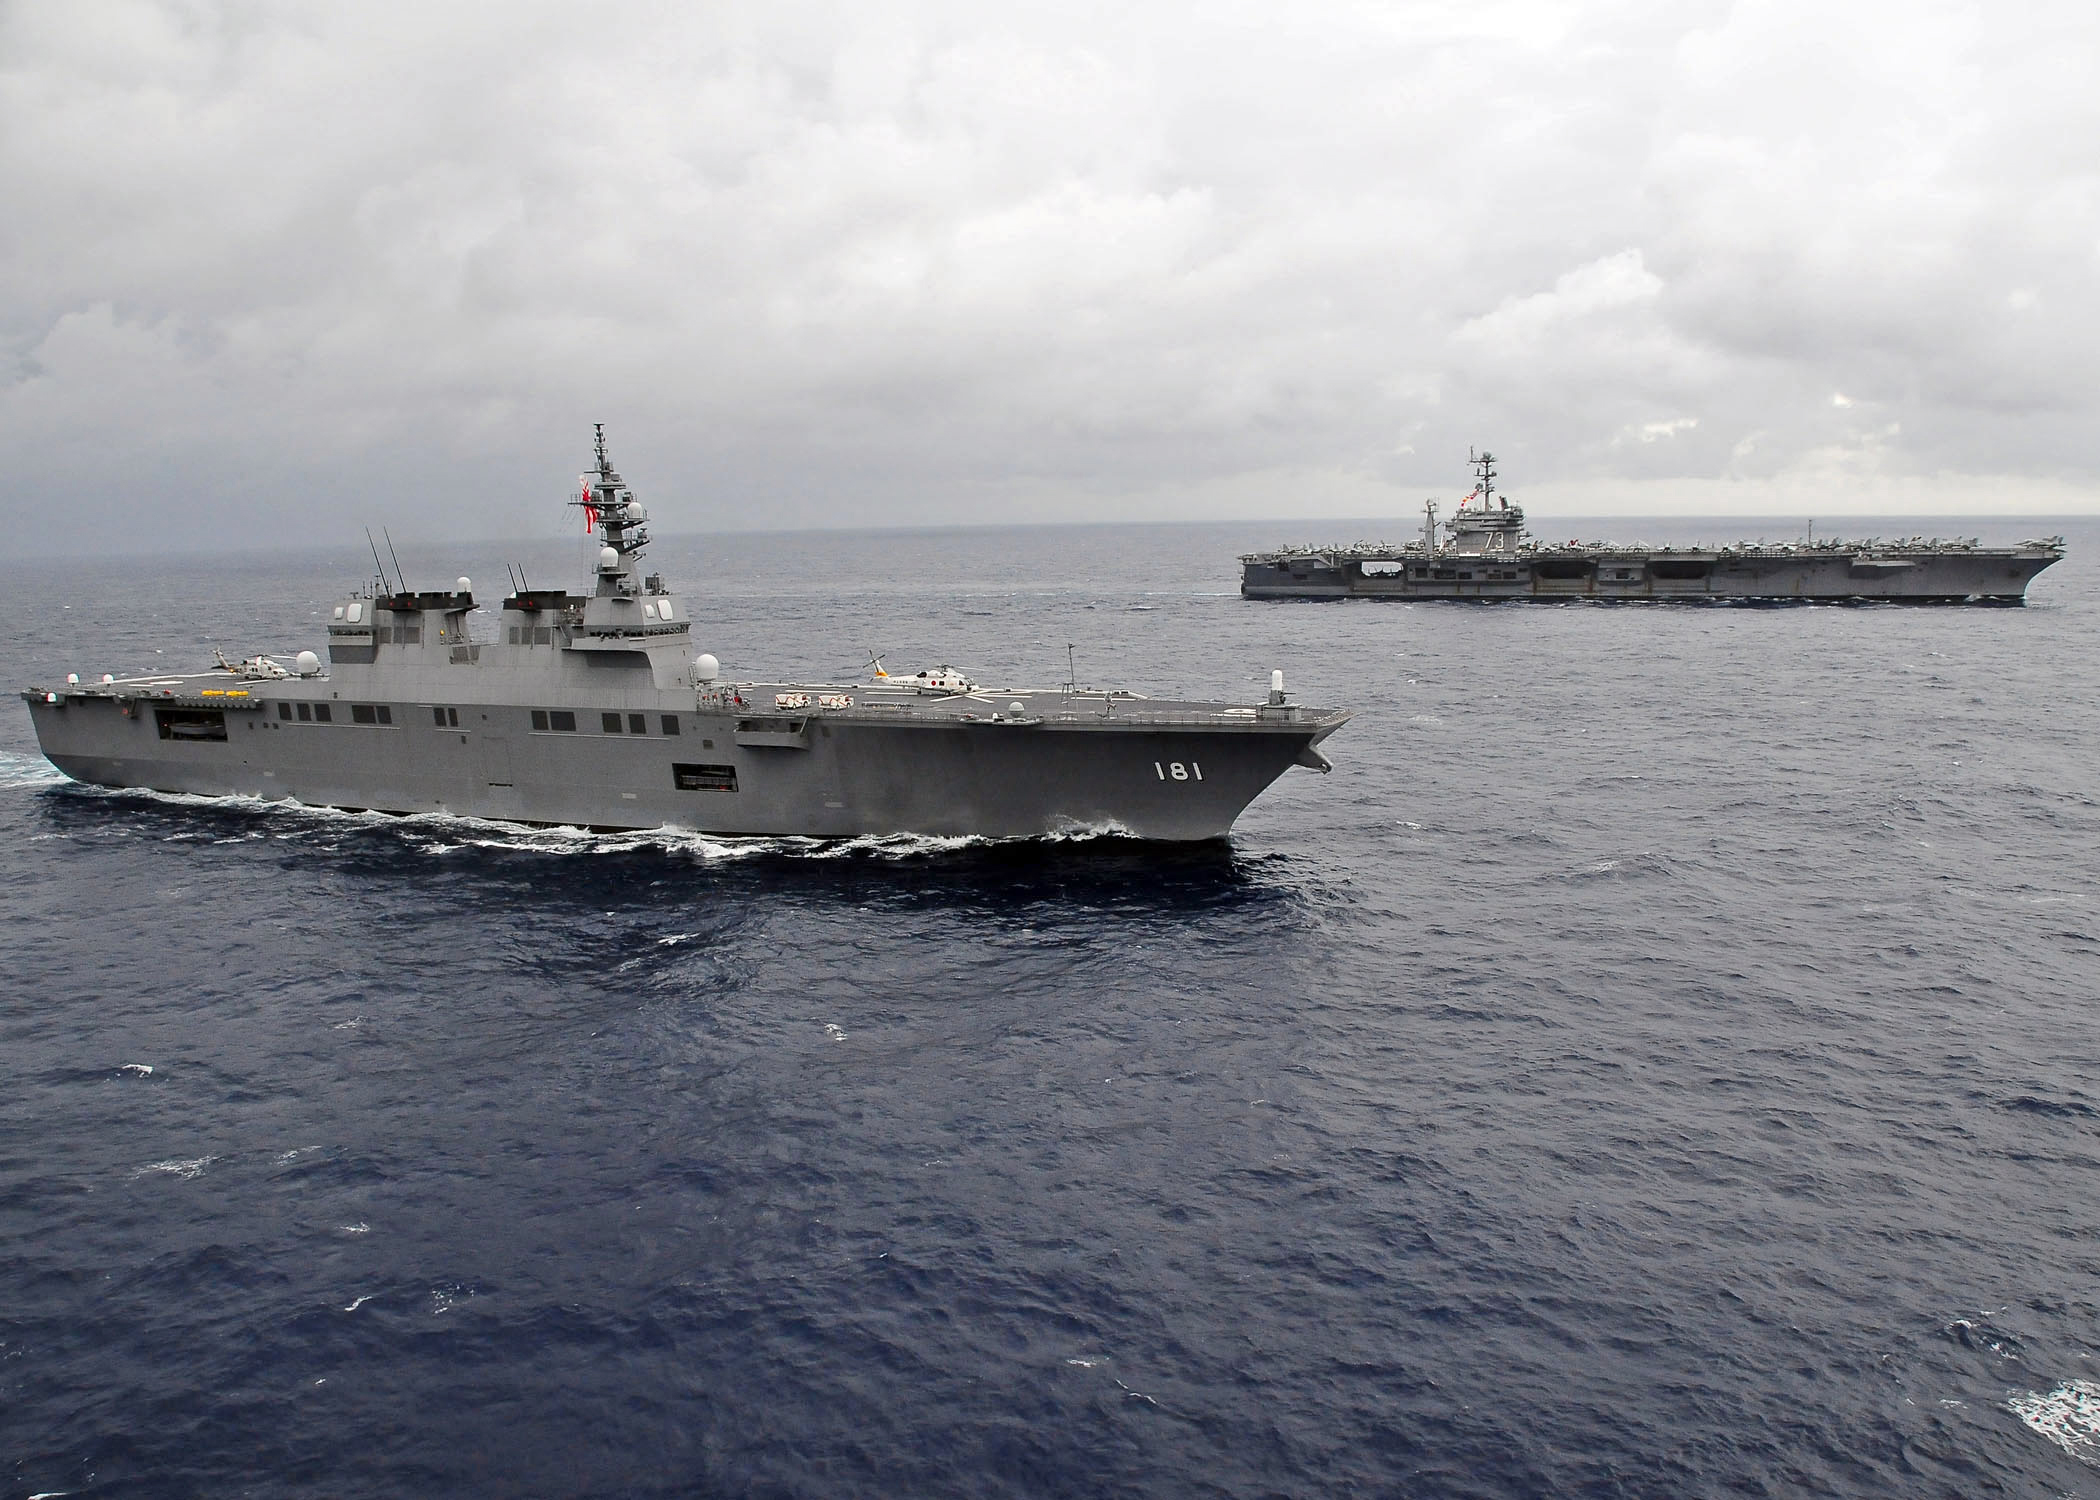 US_Navy_091117-N-1644H-087_The_Japan_Maritime_Self-Defense_Force_helicopter_destroyer_JS_Hyuga_(DDH_181)_is_underway_alongside_the_aircraft_carrier_USS_George_Washington_(CVN_73).jpg